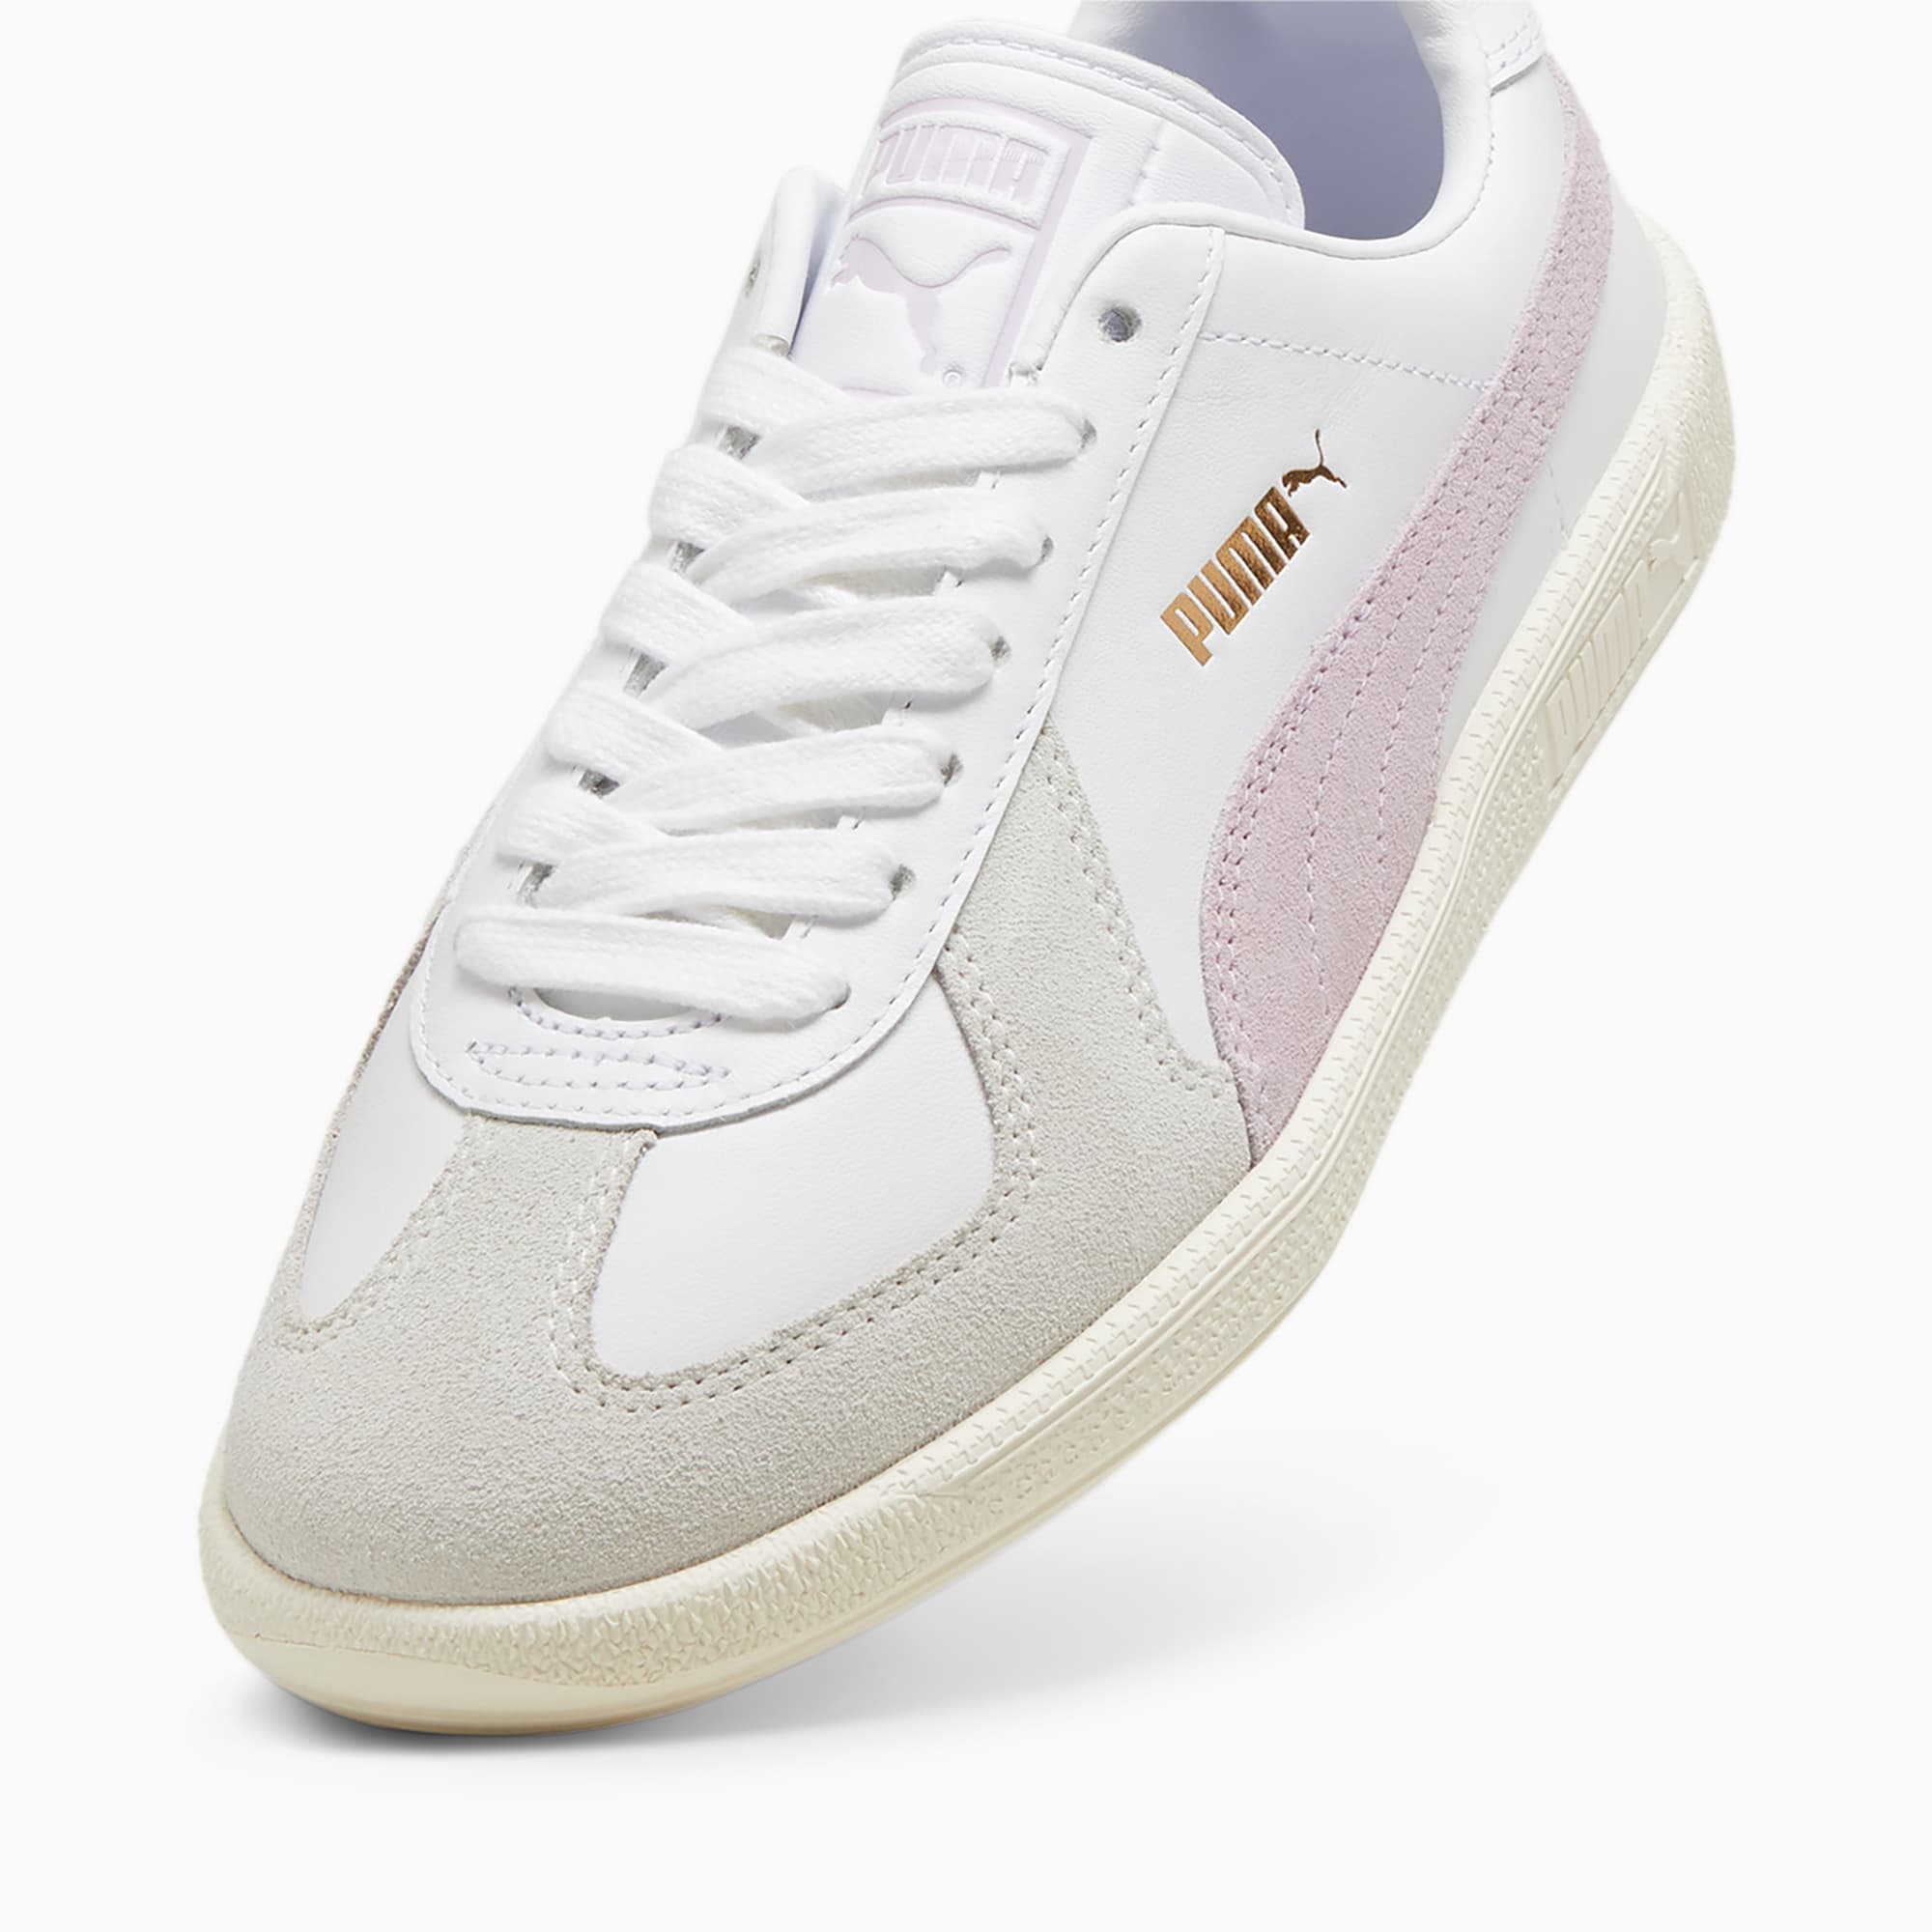 Women's PUMA Army Trainer Sneakers, White/Feather Grey/Grape Mist, Size 35,5, Shoes